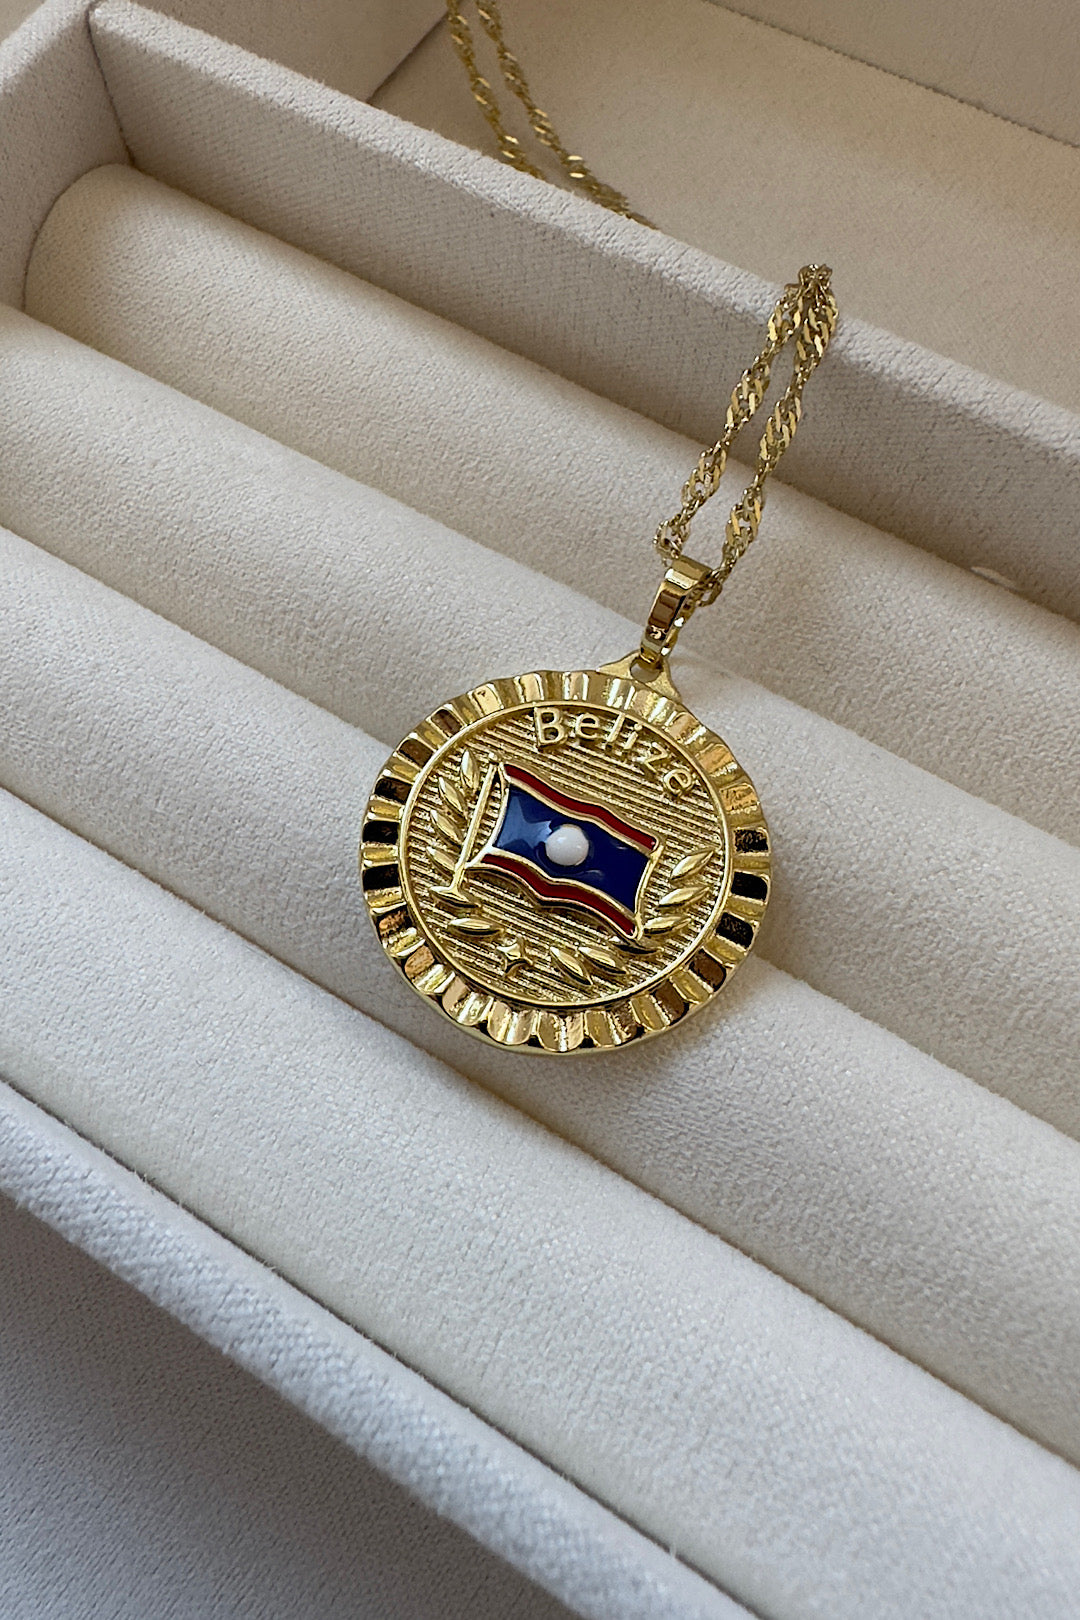 Belize Coat of Arms Gold Necklace 